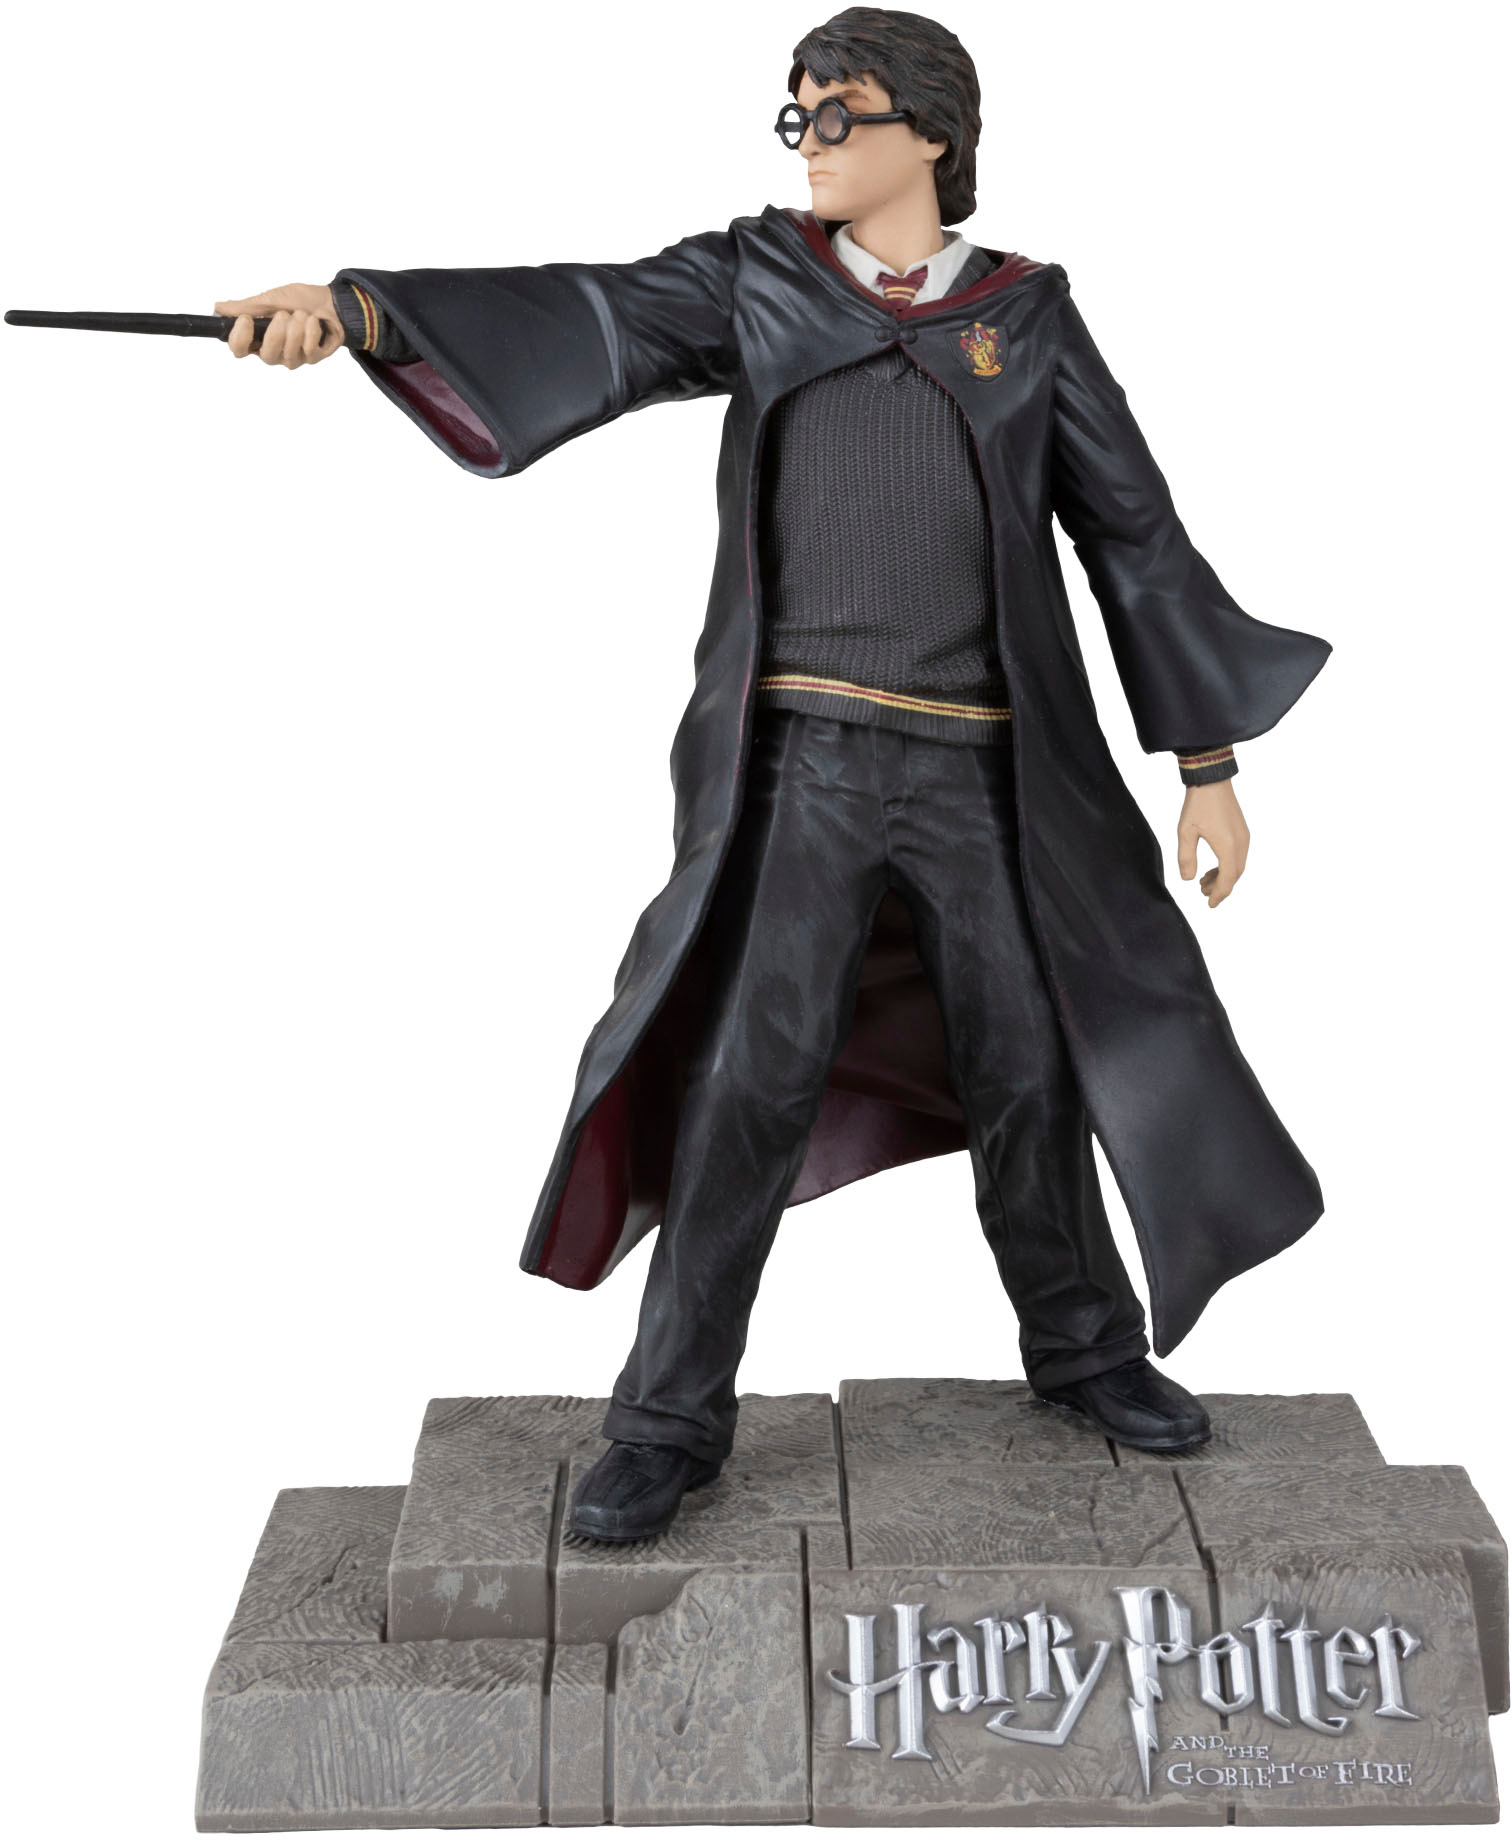 McFarlane Toys Movie Maniacs WB100 7 Posed Harry Potter 14002 - Best Buy